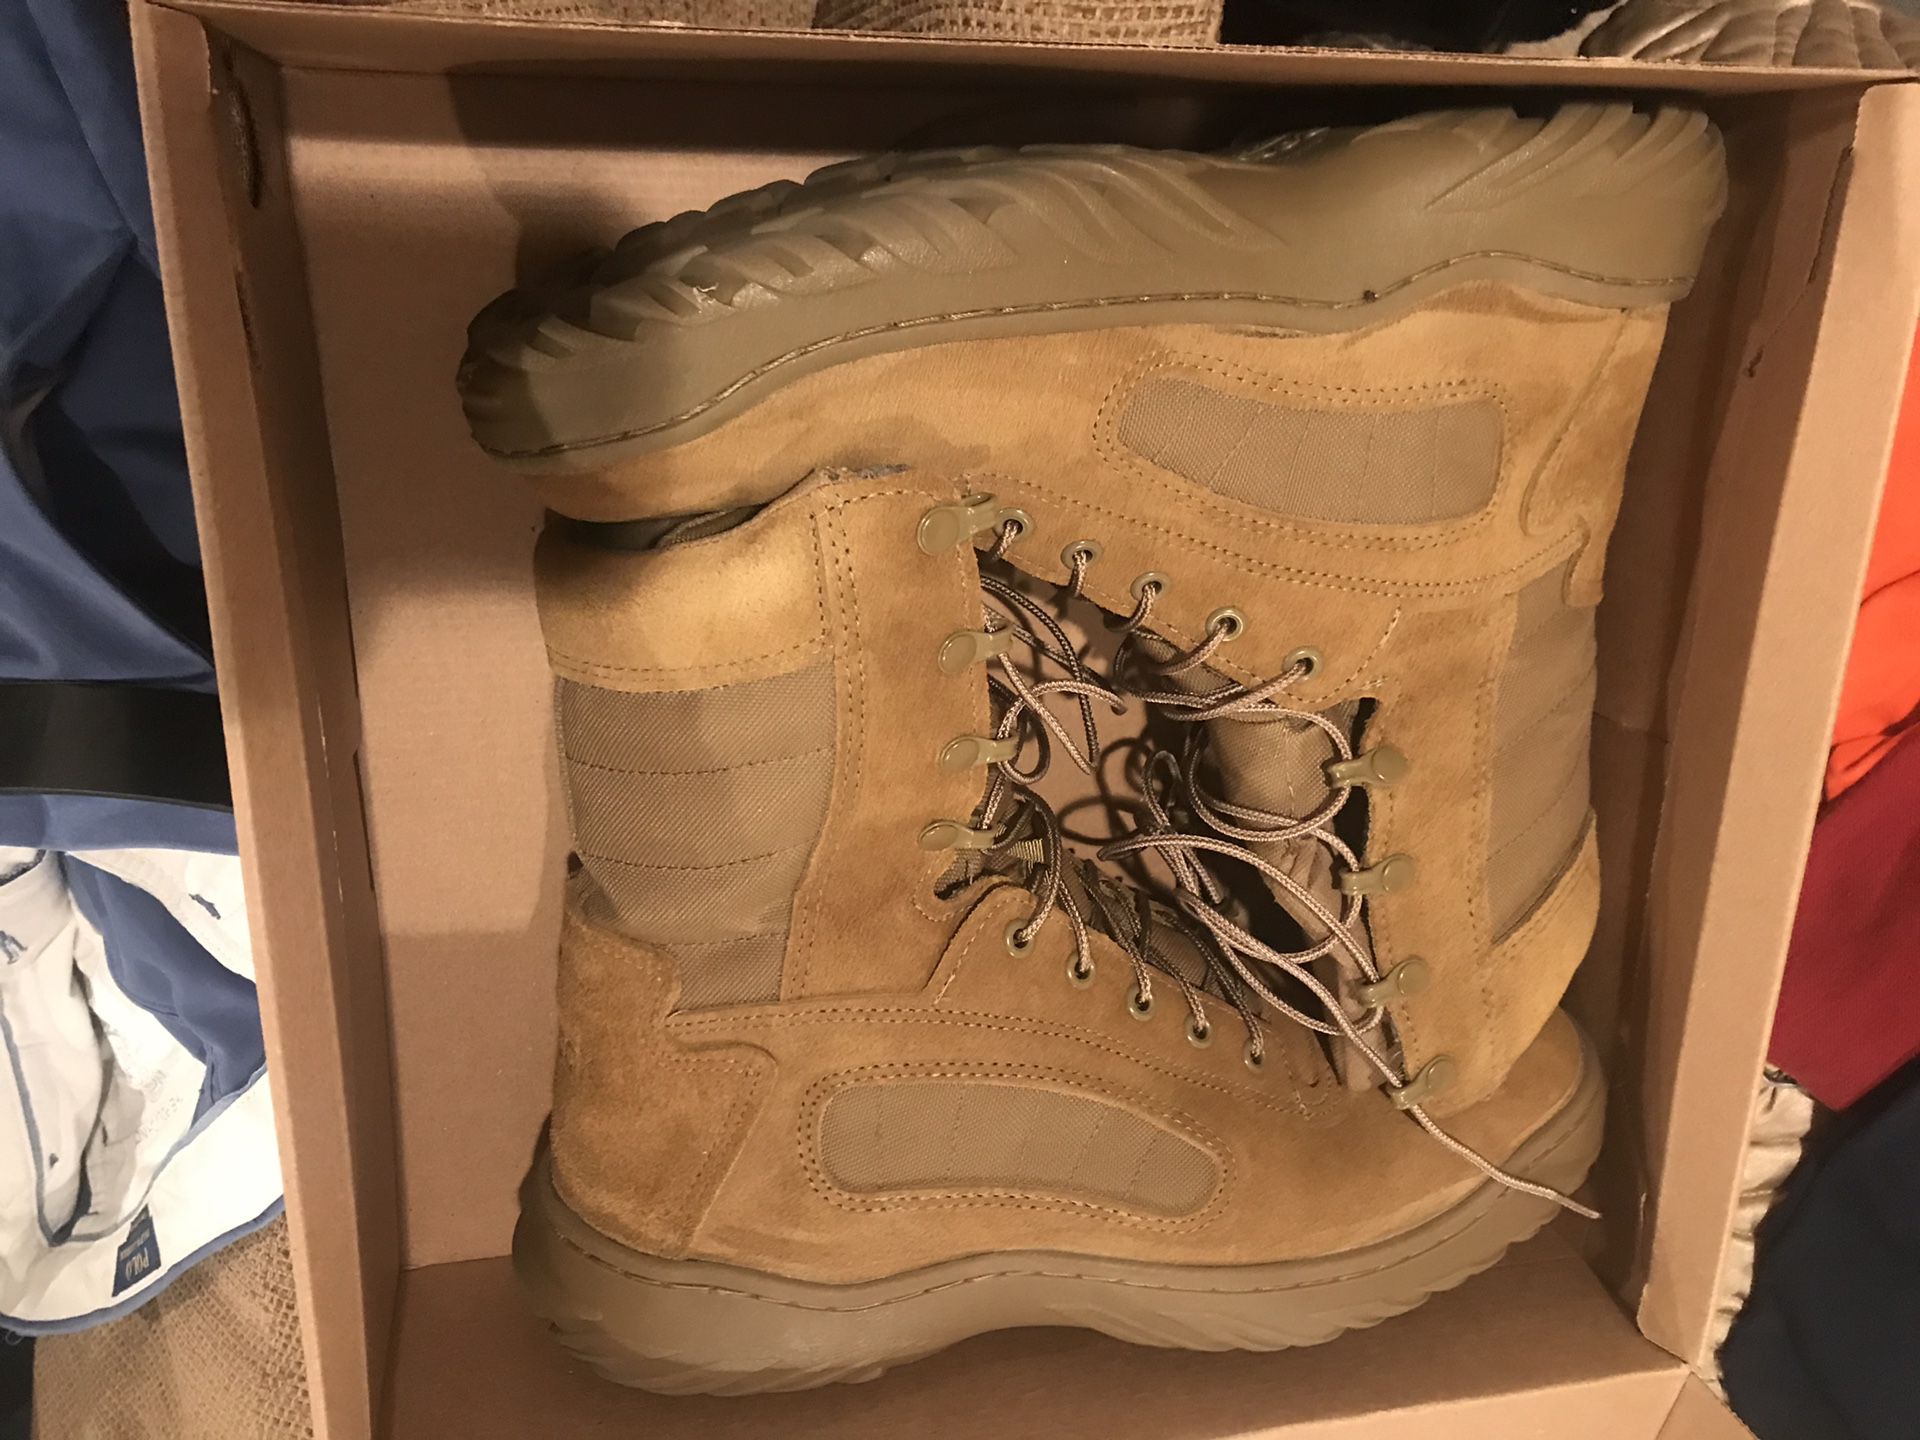 Reebok Fusion Max Coyote army boots